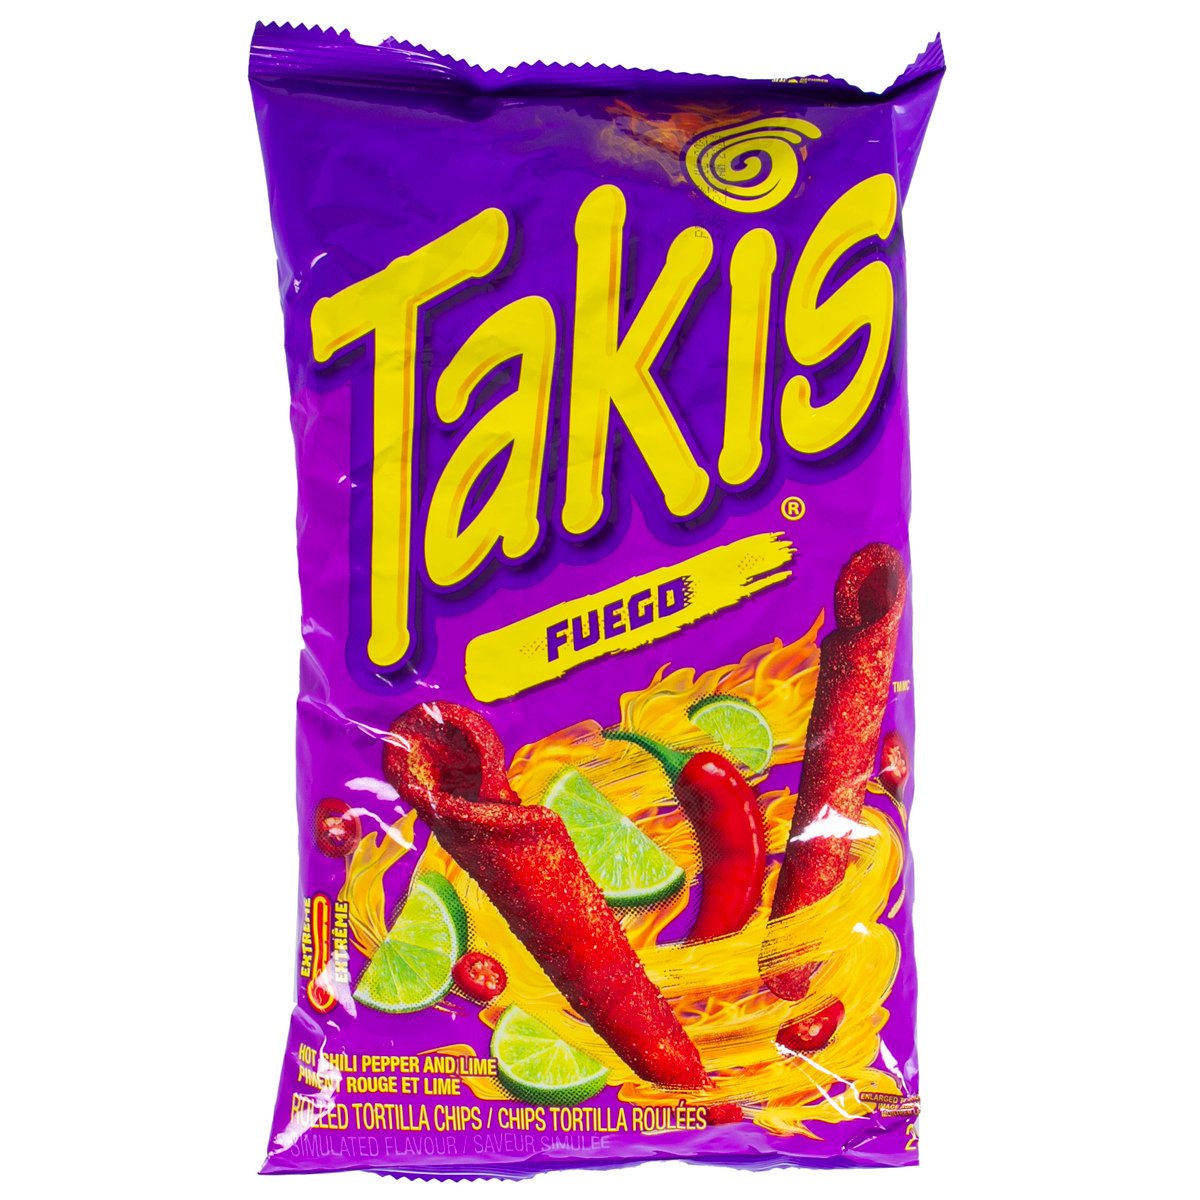 Takis Fuego Hot Chili Pepper And Lime Rolled Tortilla Chips 280 g